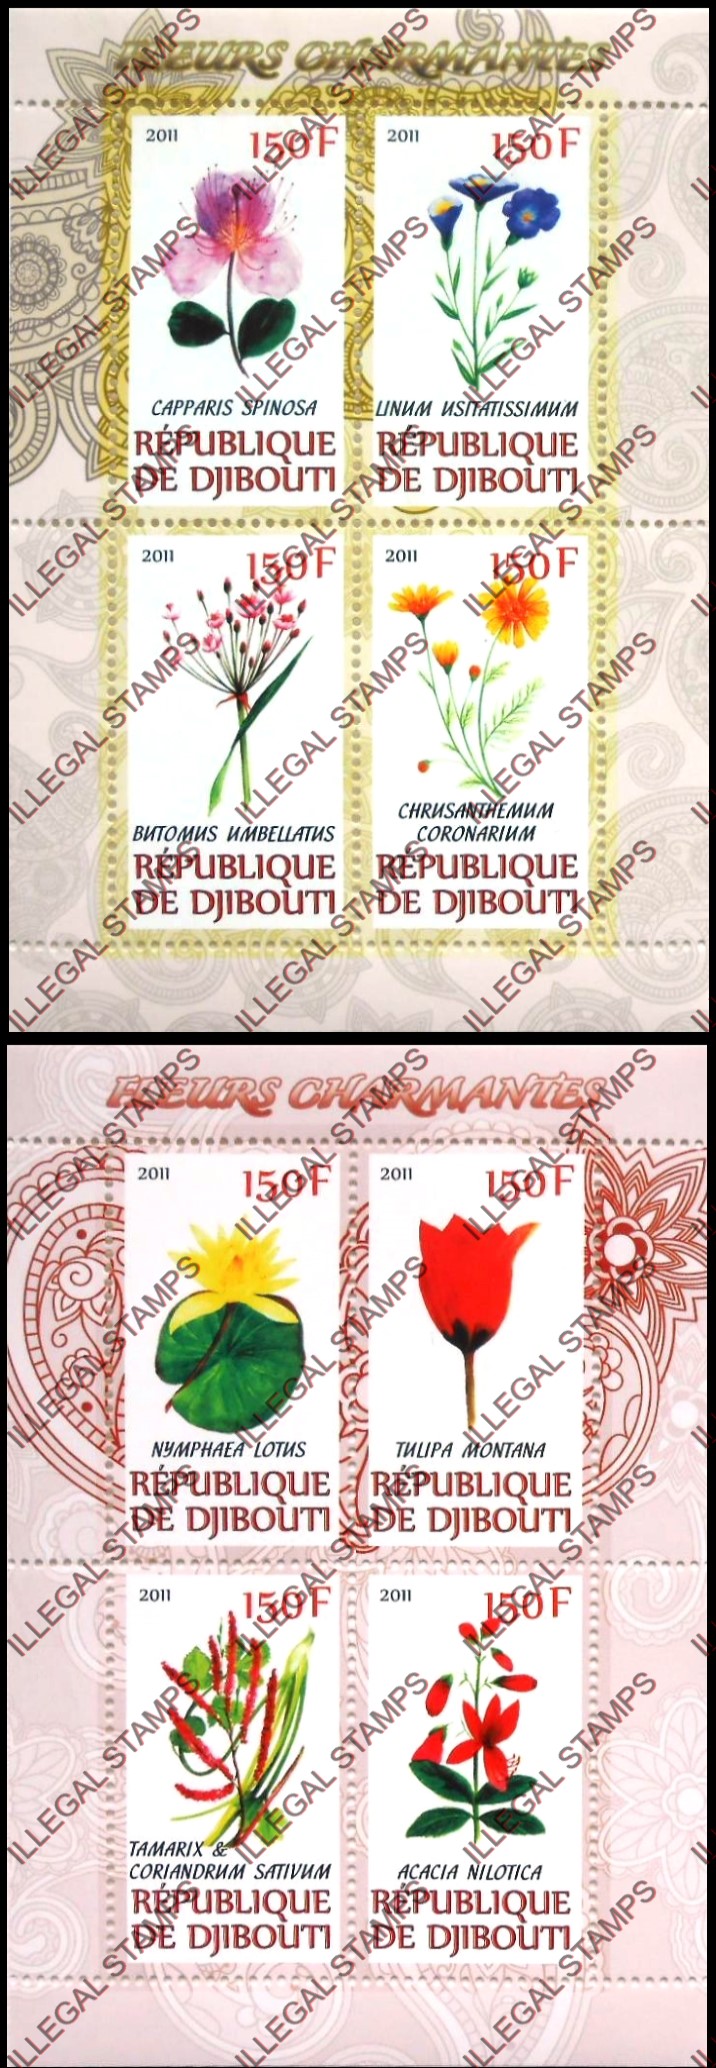 Djibouti 2011 Charming Flowers Illegal Stamp Souvenir Sheets of 4